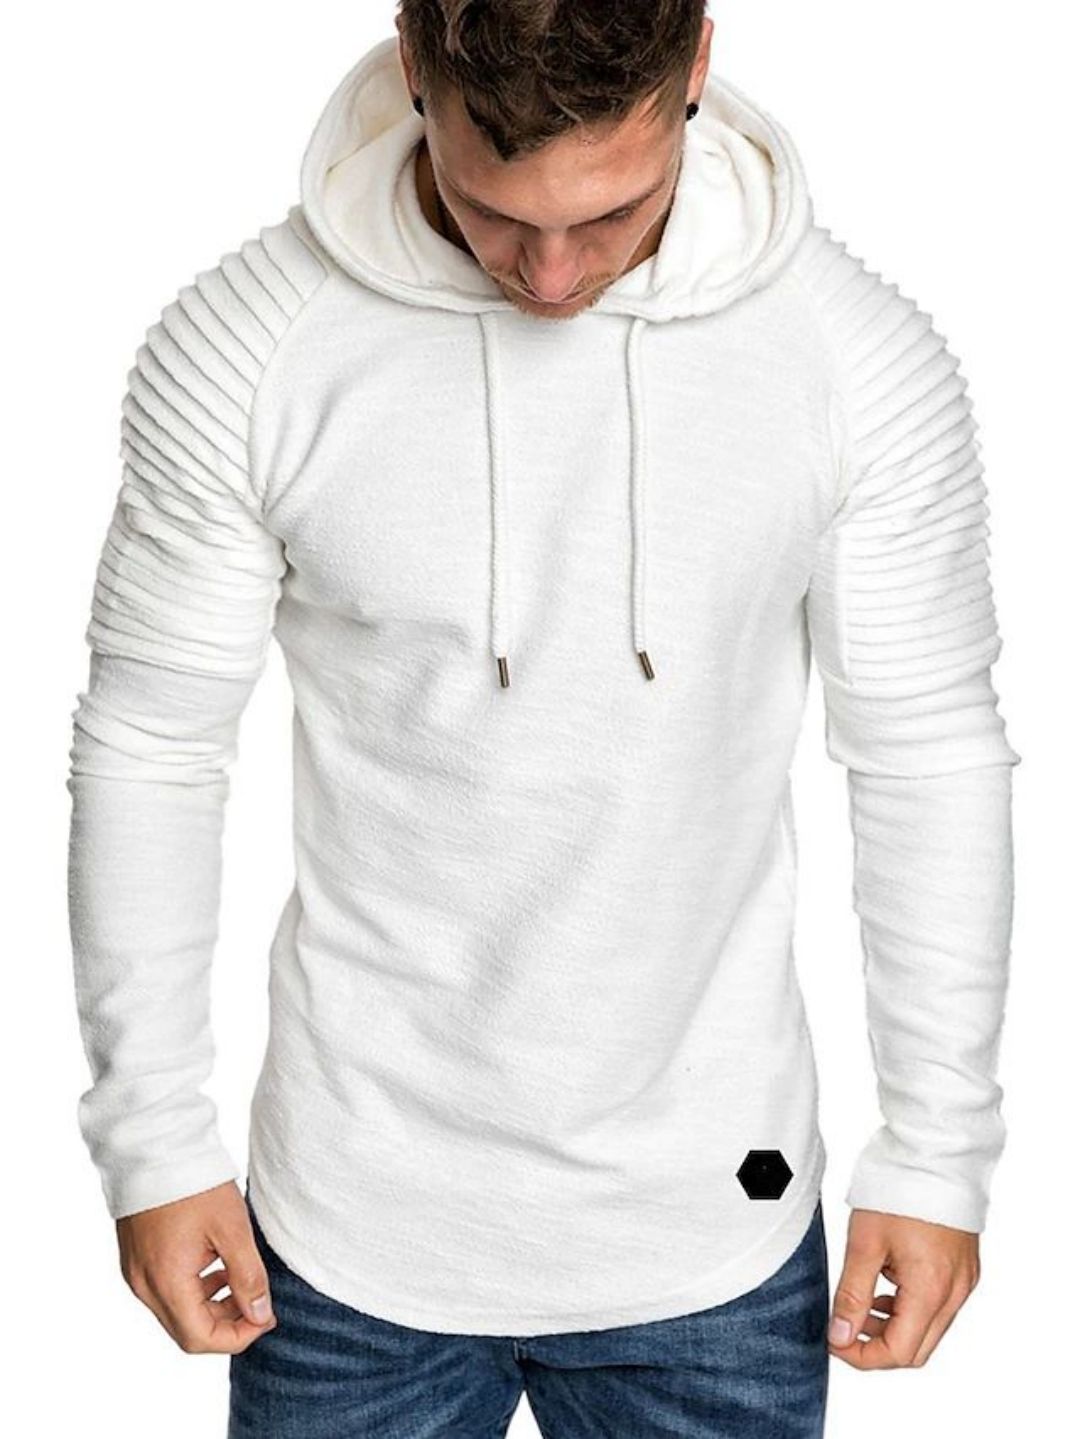 Men's Solid Color Pullover Sports Hoodies